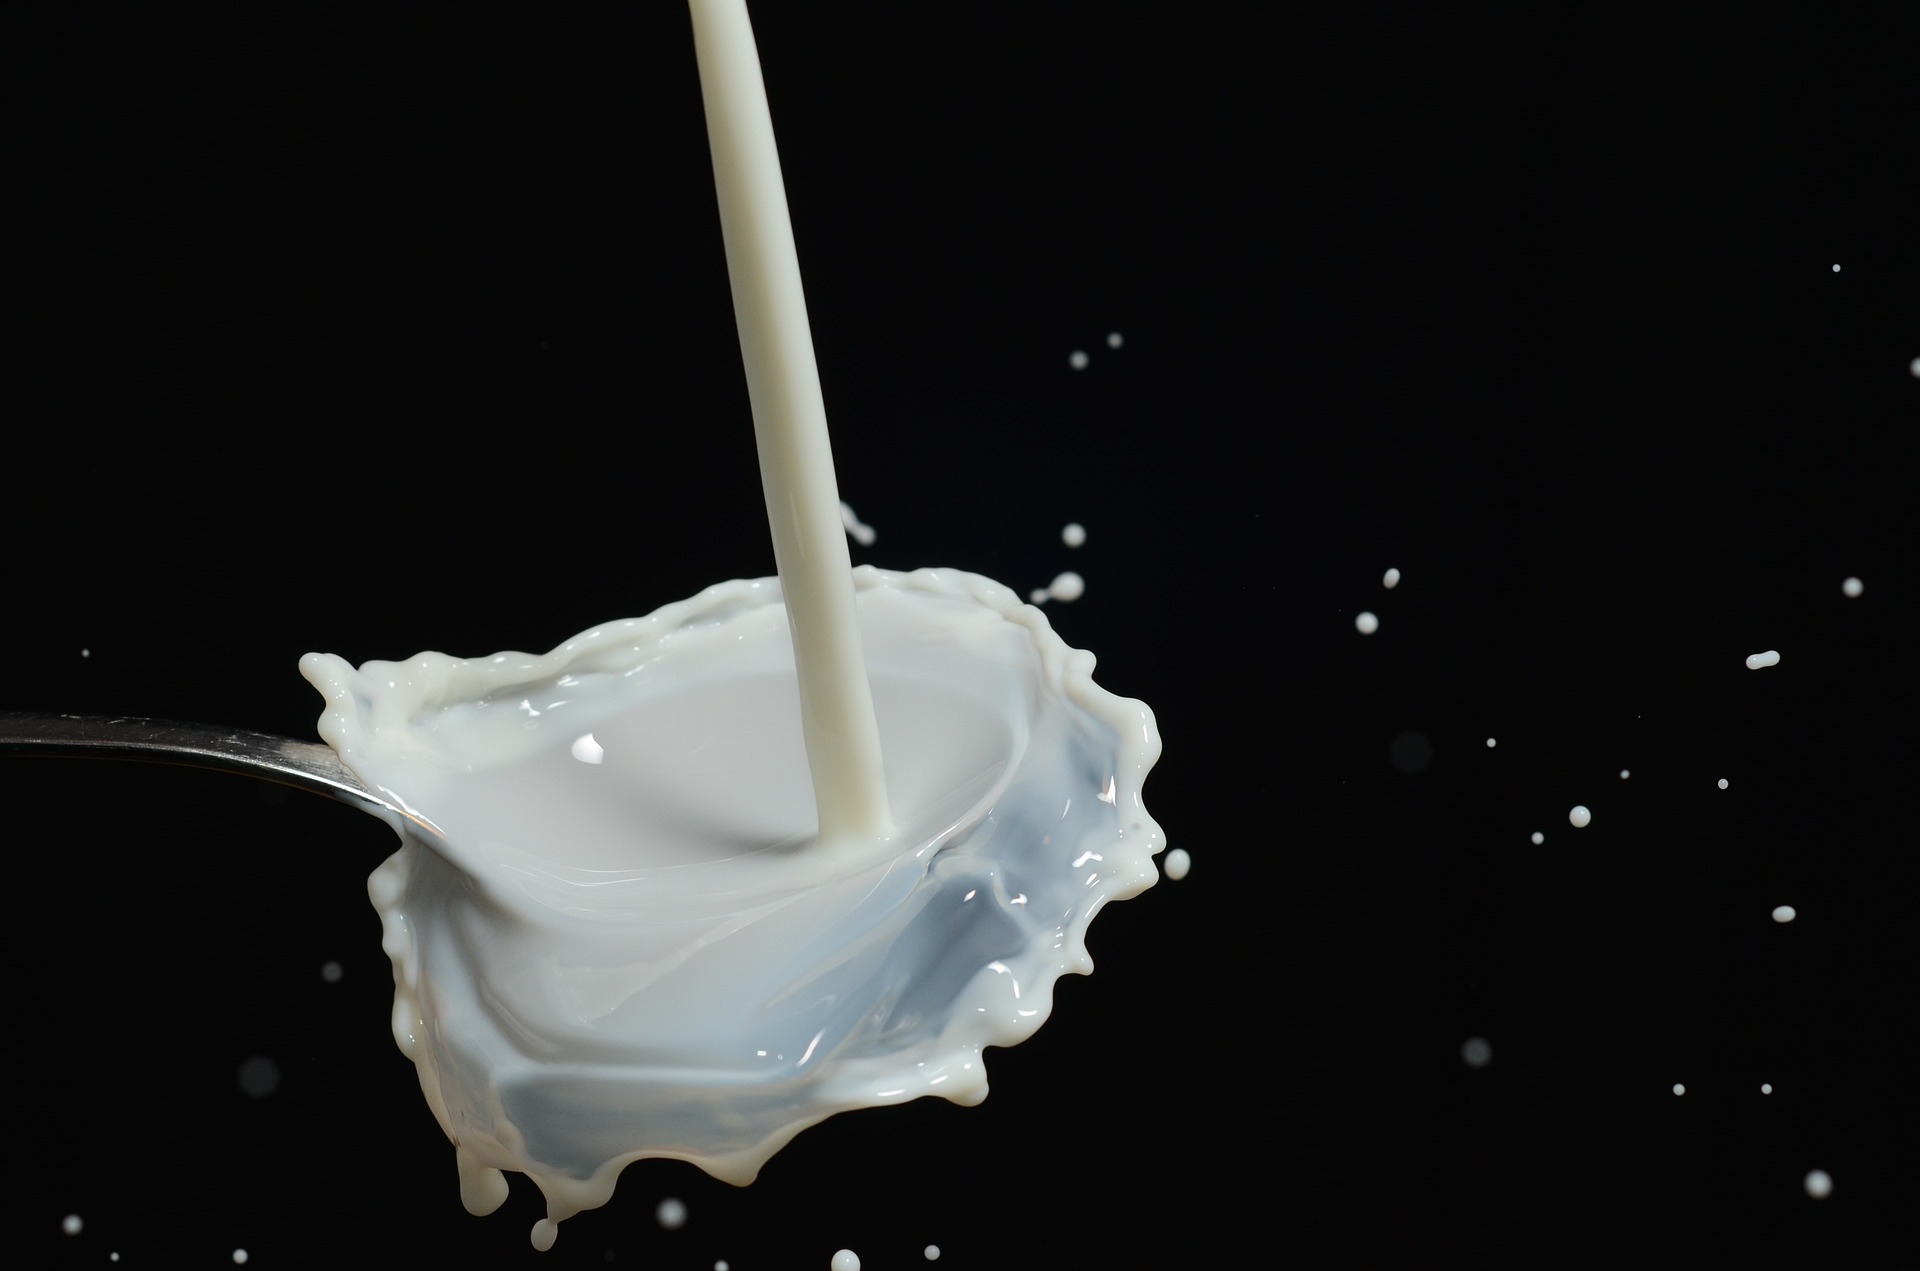 The link between milk and breast cancer